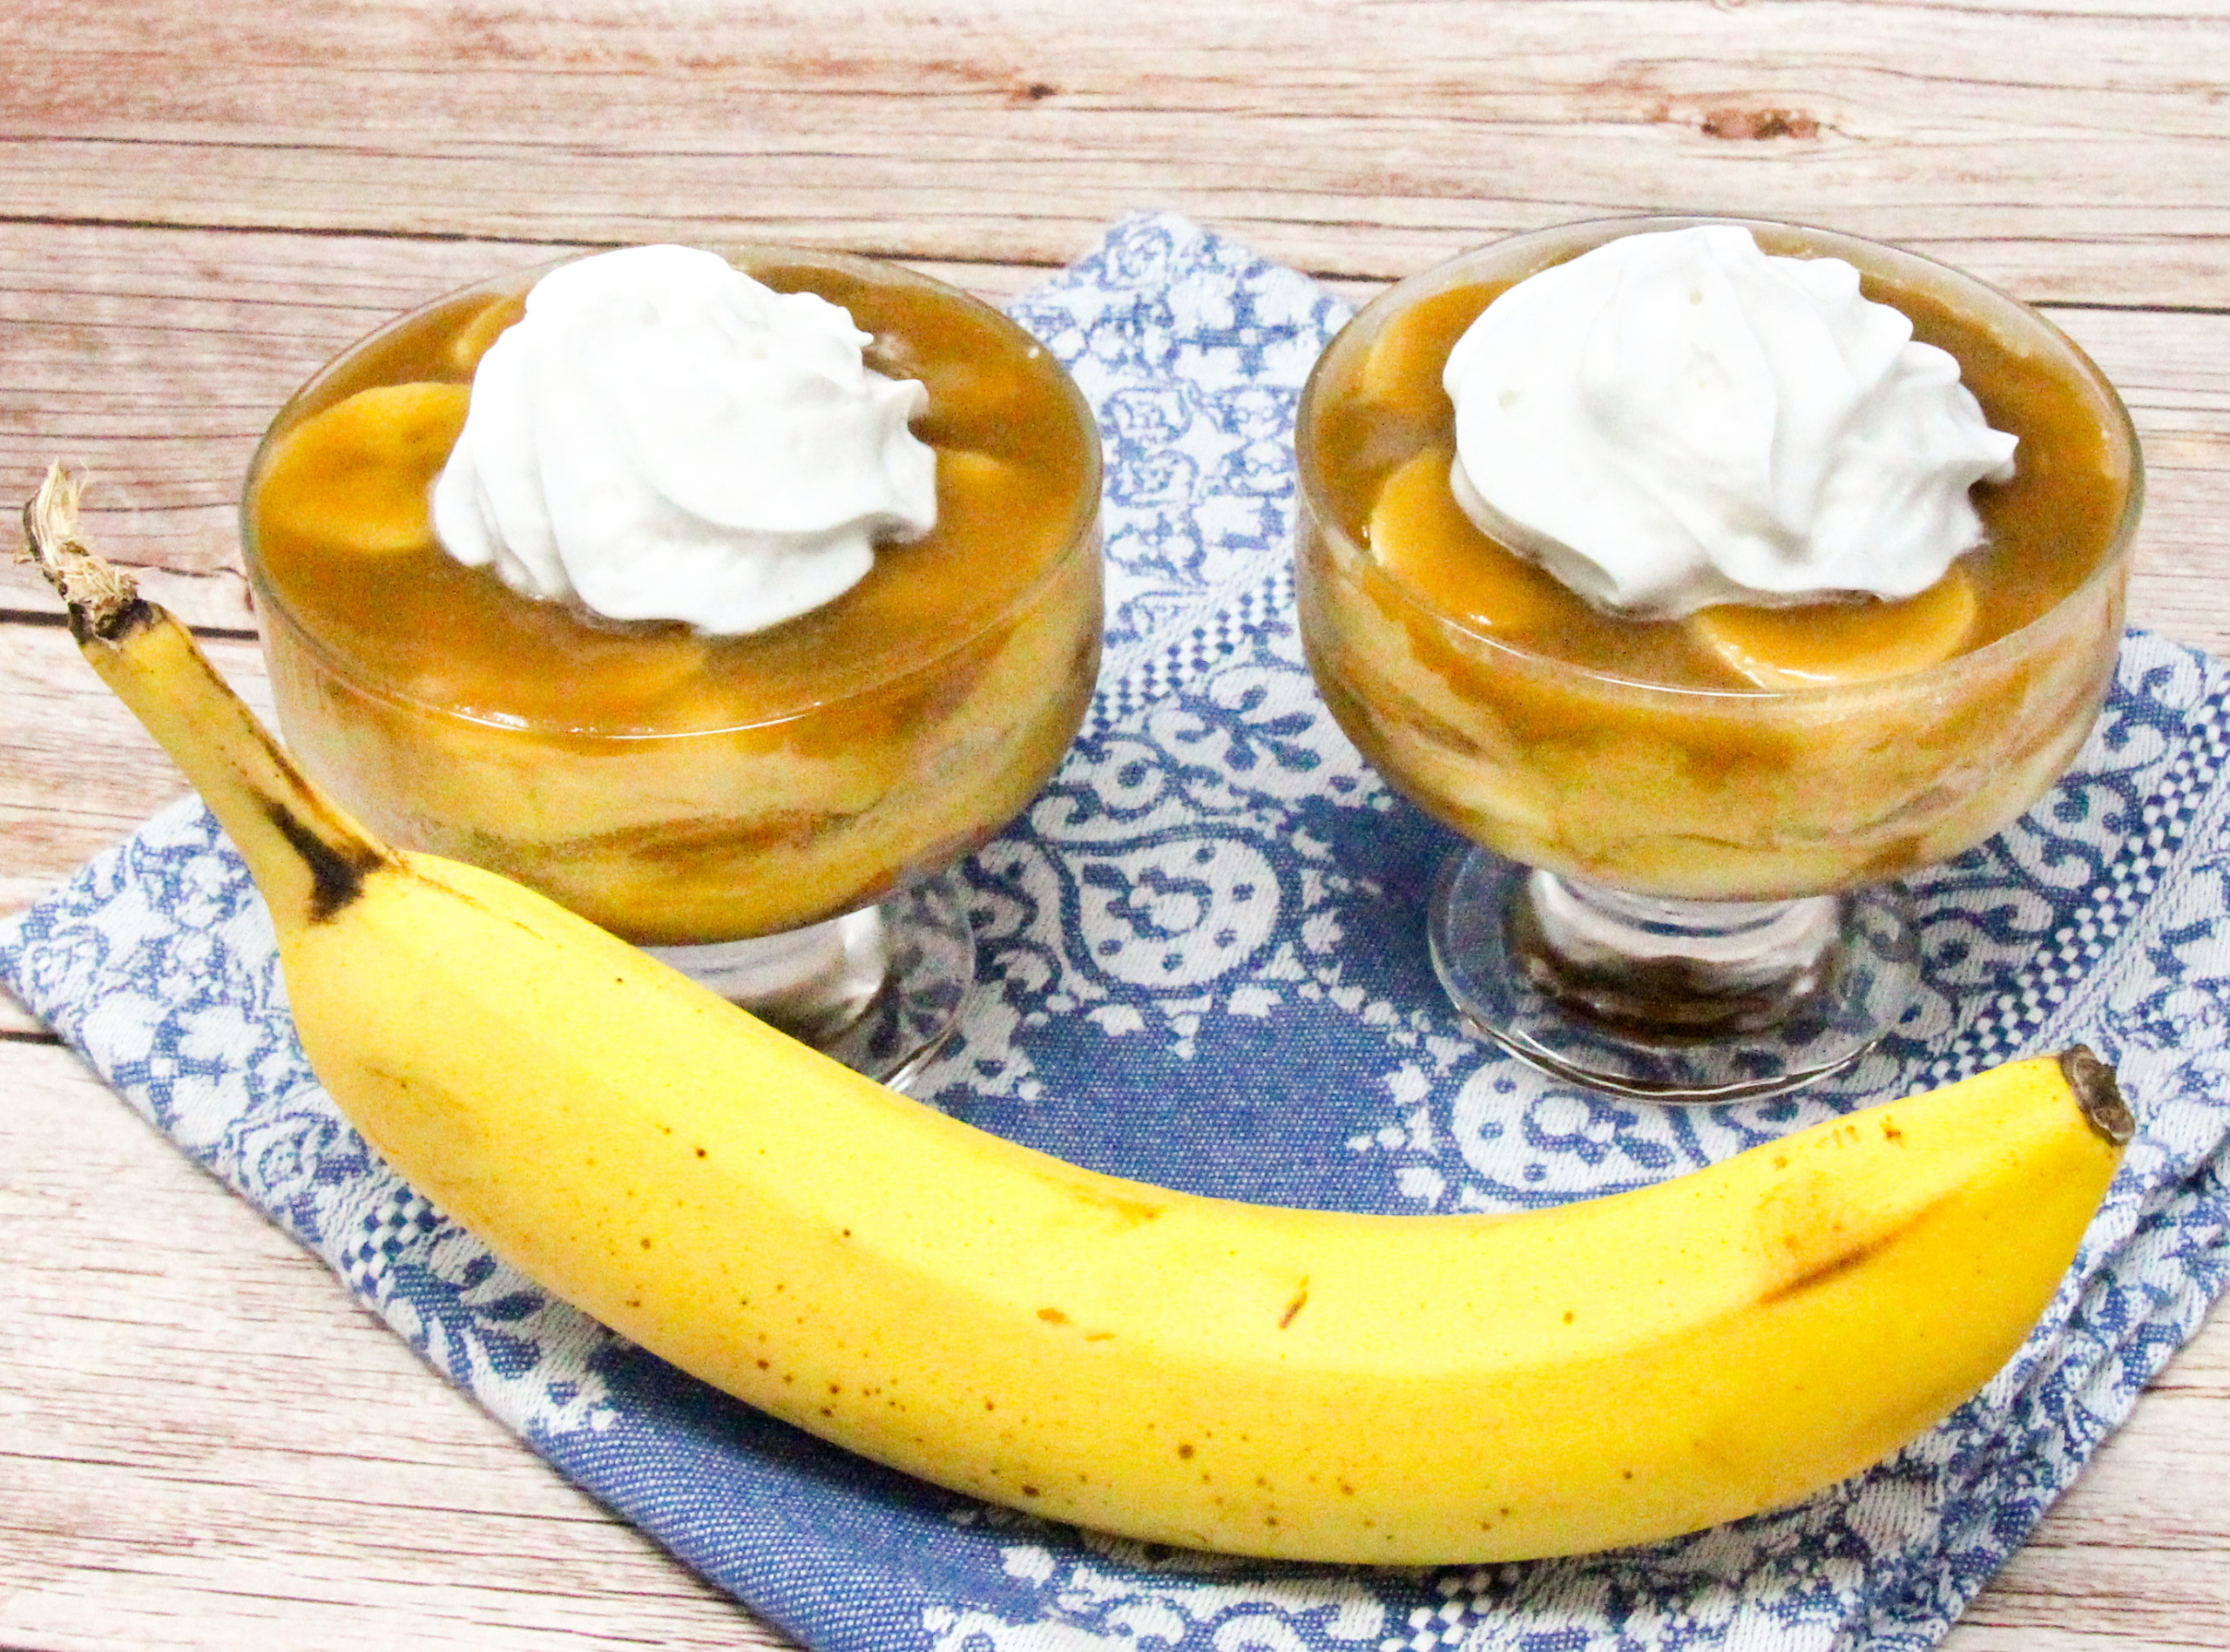 Salted Caramel Banana Pudding is pure comfort food, and when paired with the scrumptious caramel sauce this simple dessert is elevated to company worthy! Recipe shared with permission granted by Krista Davis, author of THE DIVA GOES OVERBOARD. 